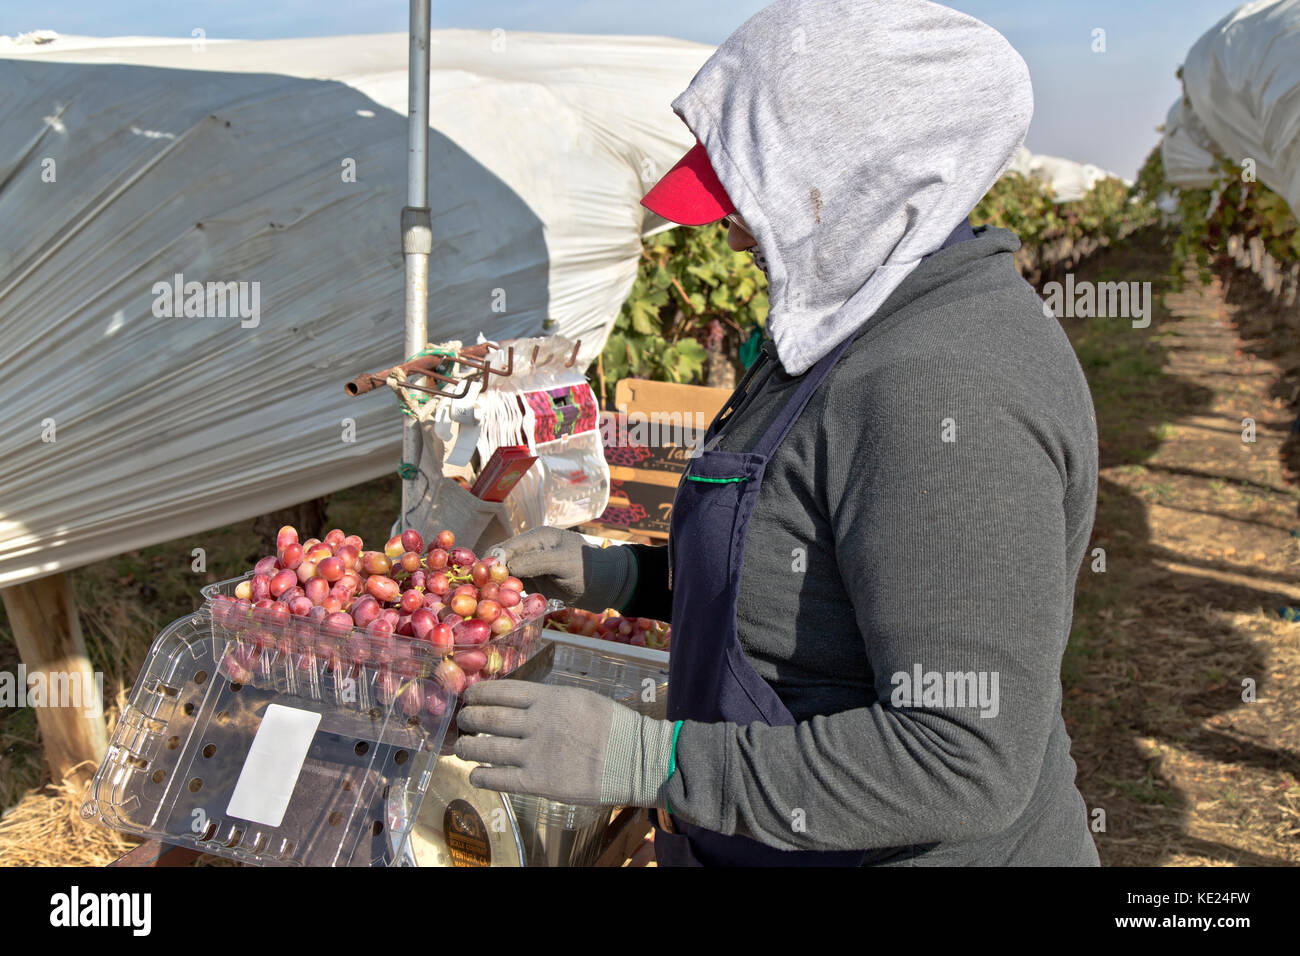 Field worker (female) weighing & packaging harvested  Red Seedless Table Grapes 'Crimson' variety  'Vitis vinifera't, rows of grape vines are covered  Stock Photo